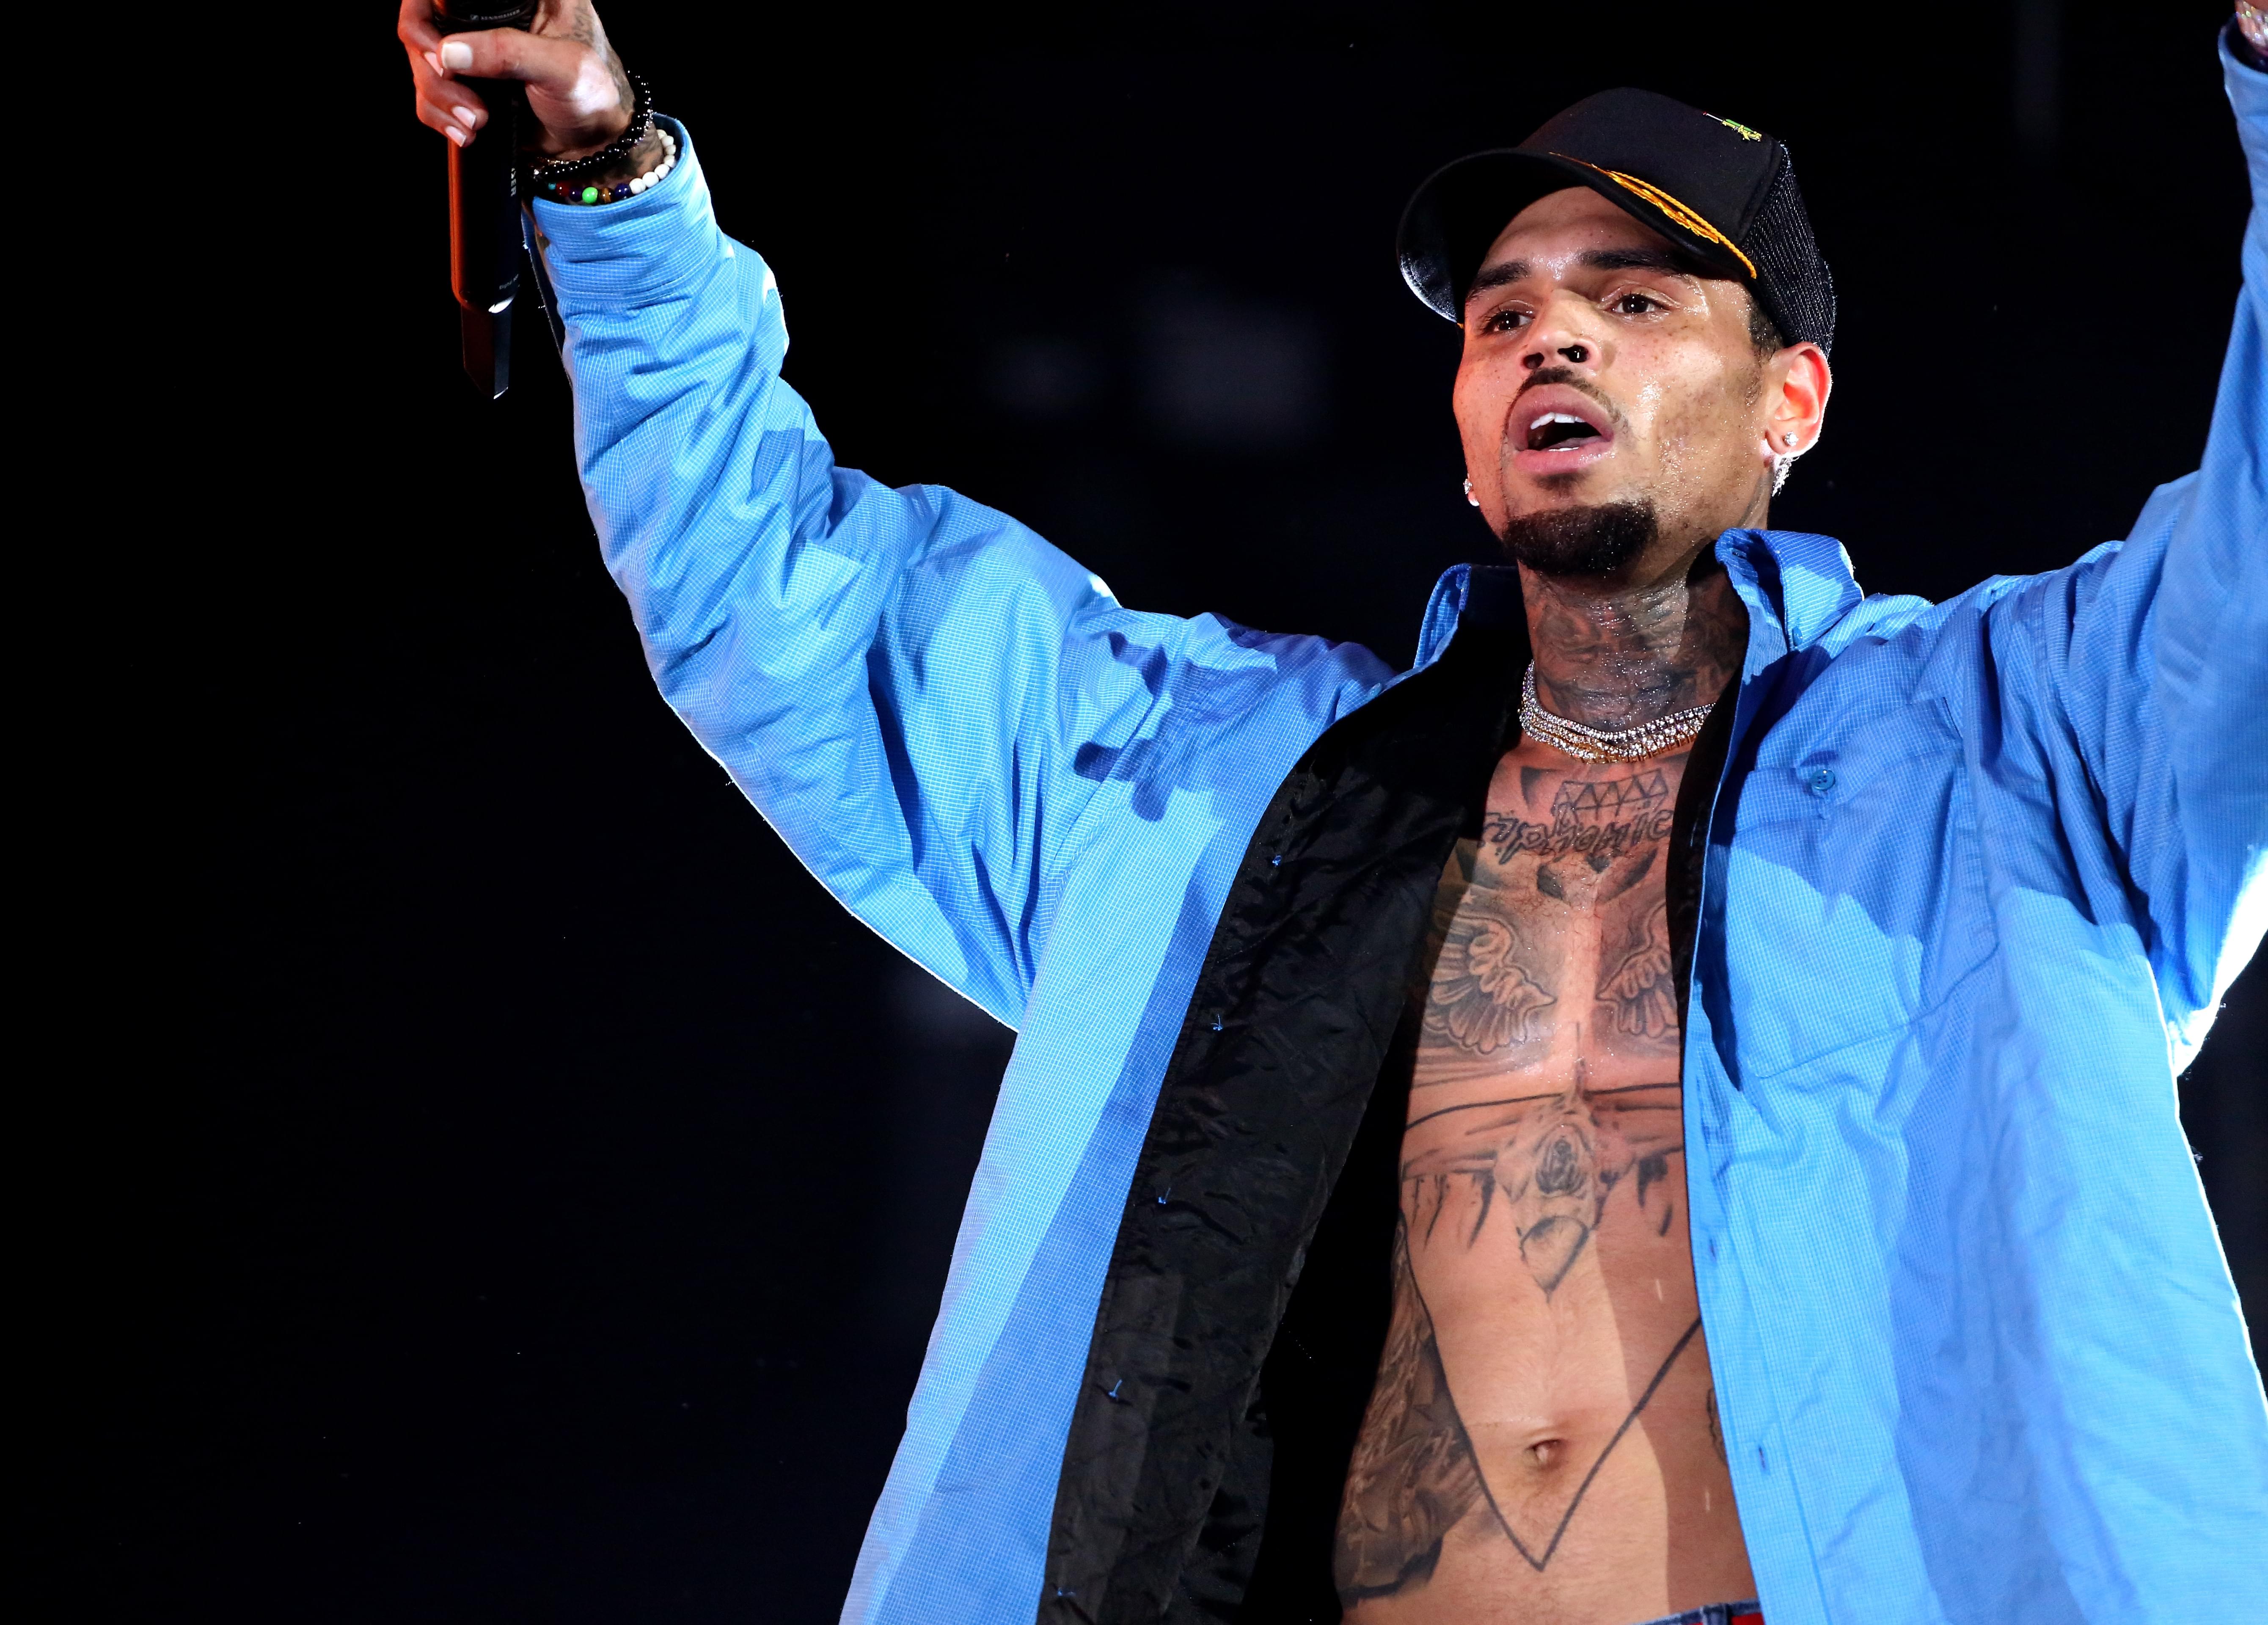 Chris Brown Detained For Rape Allegations And Drug Charges